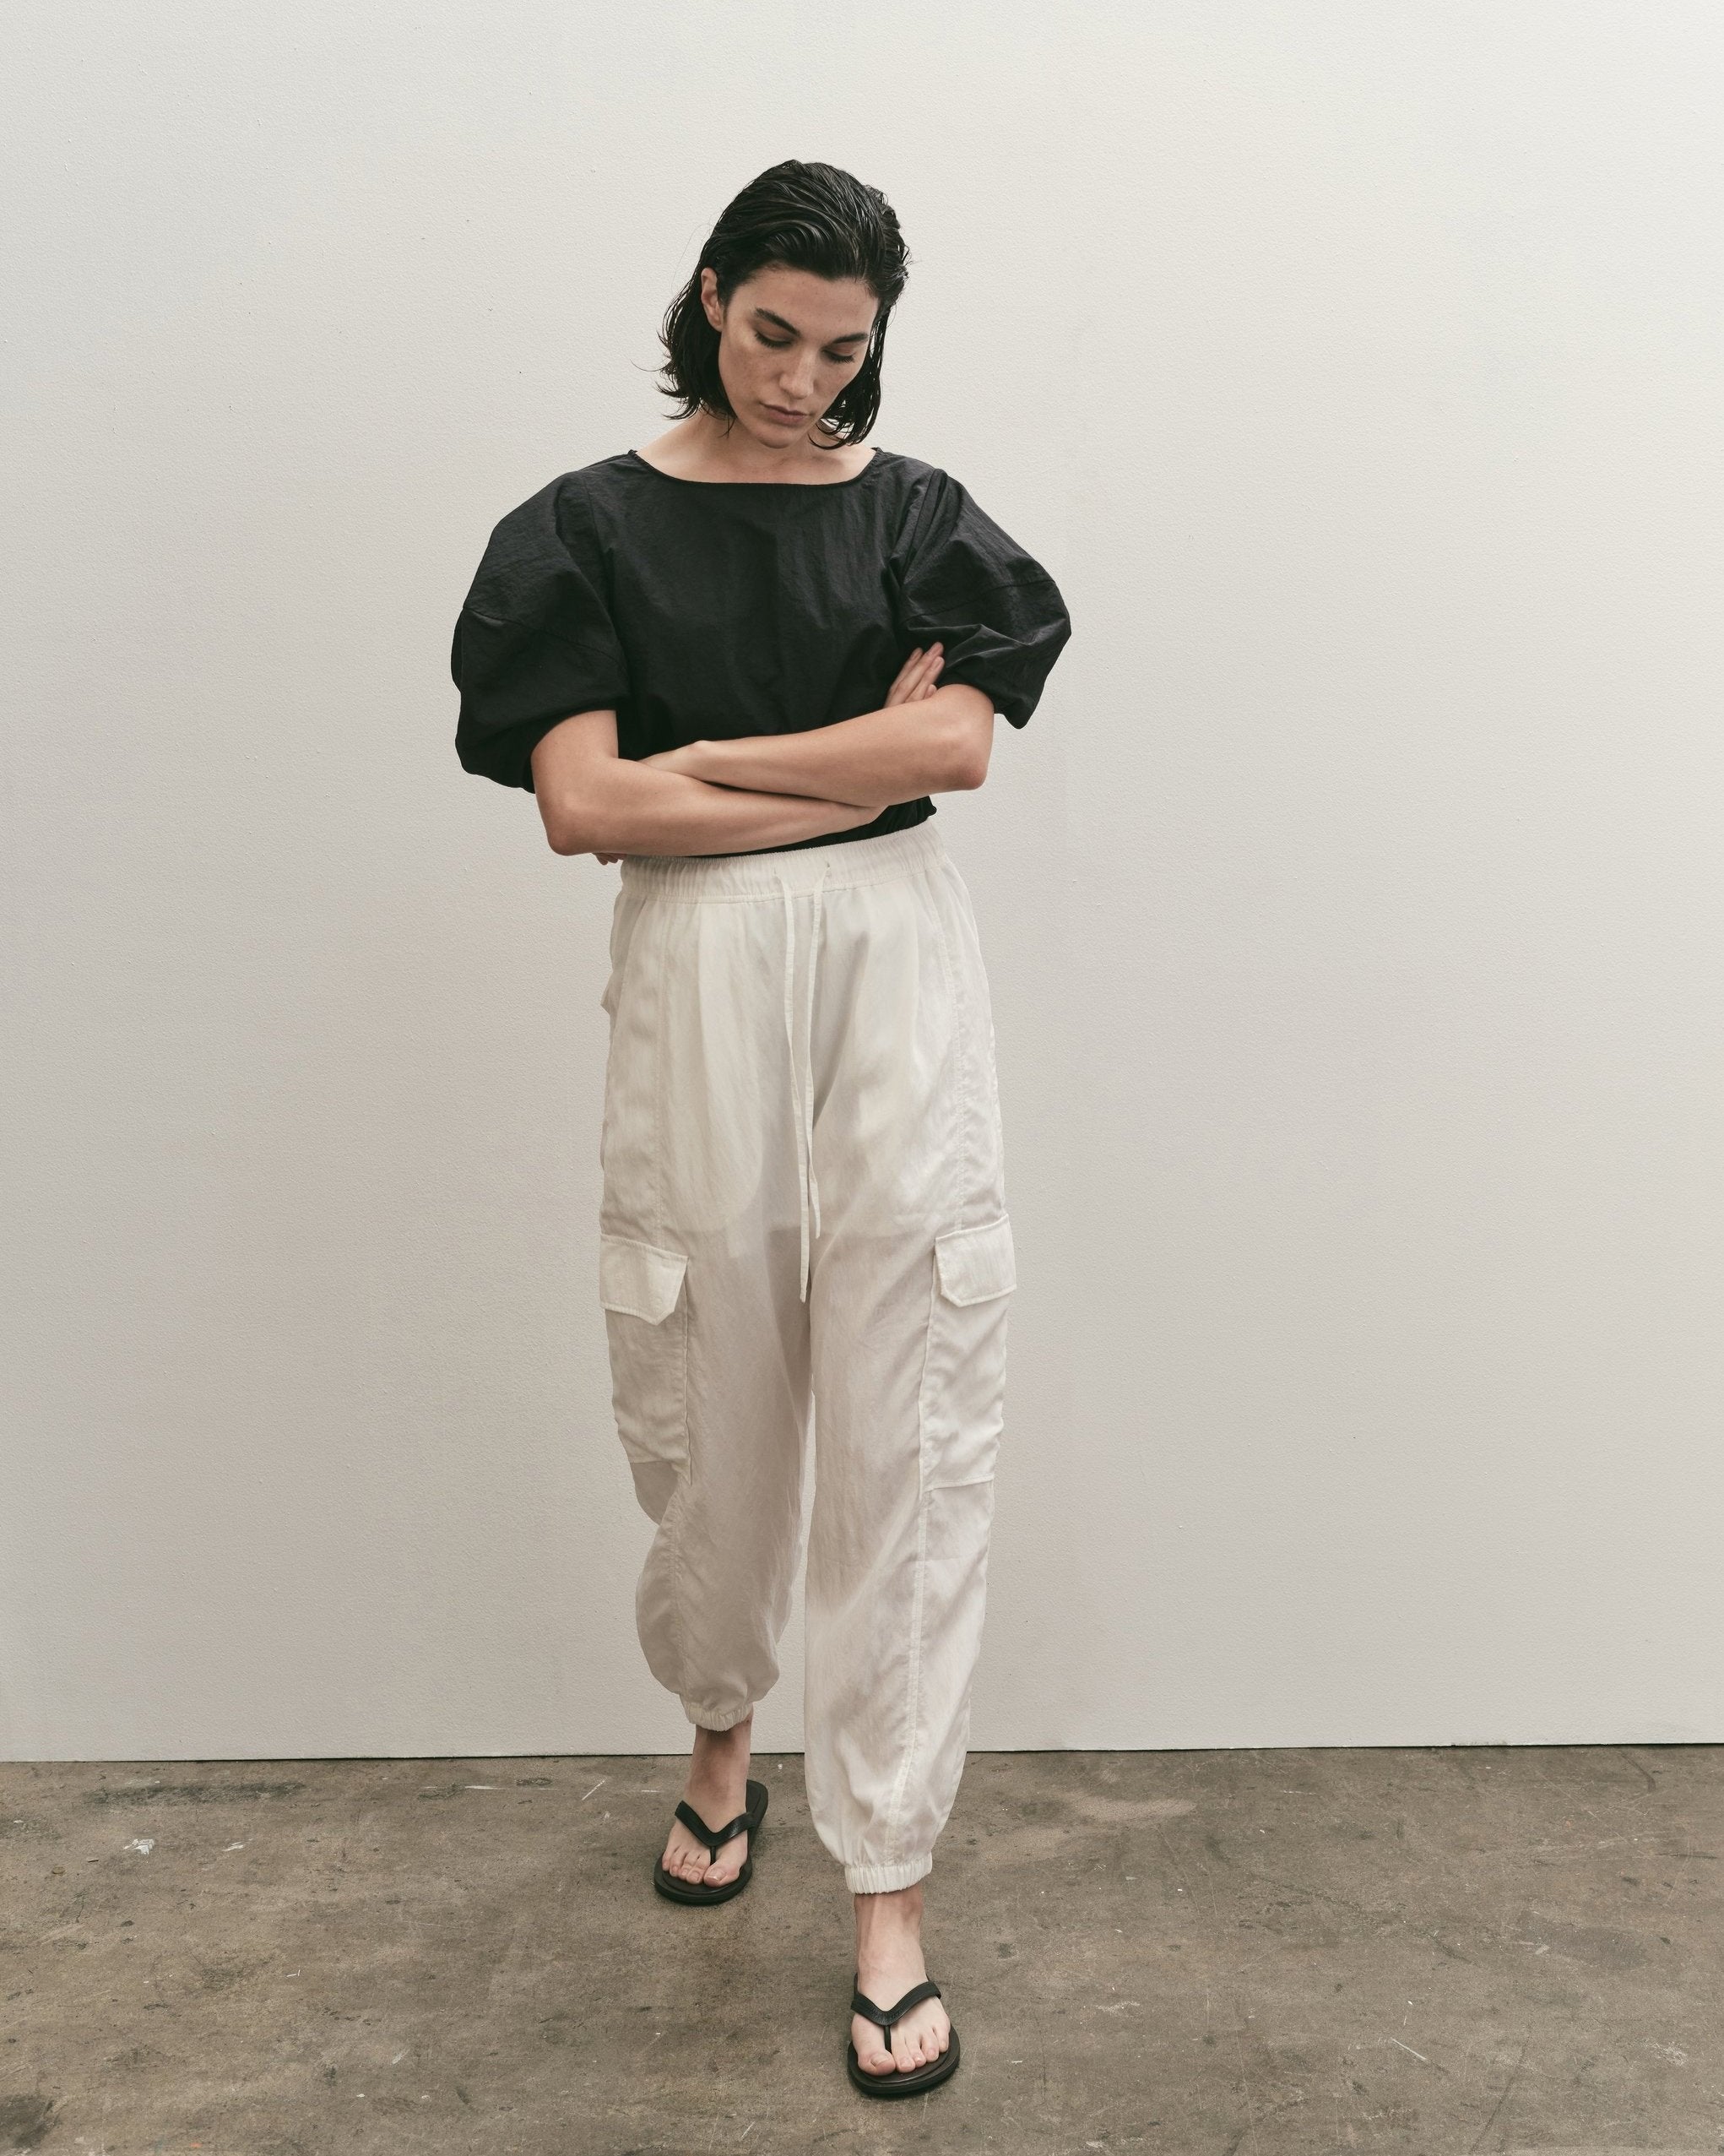 MIJEONG PARK LIGHTWEIGHT CARGO PANTS IN WHITE